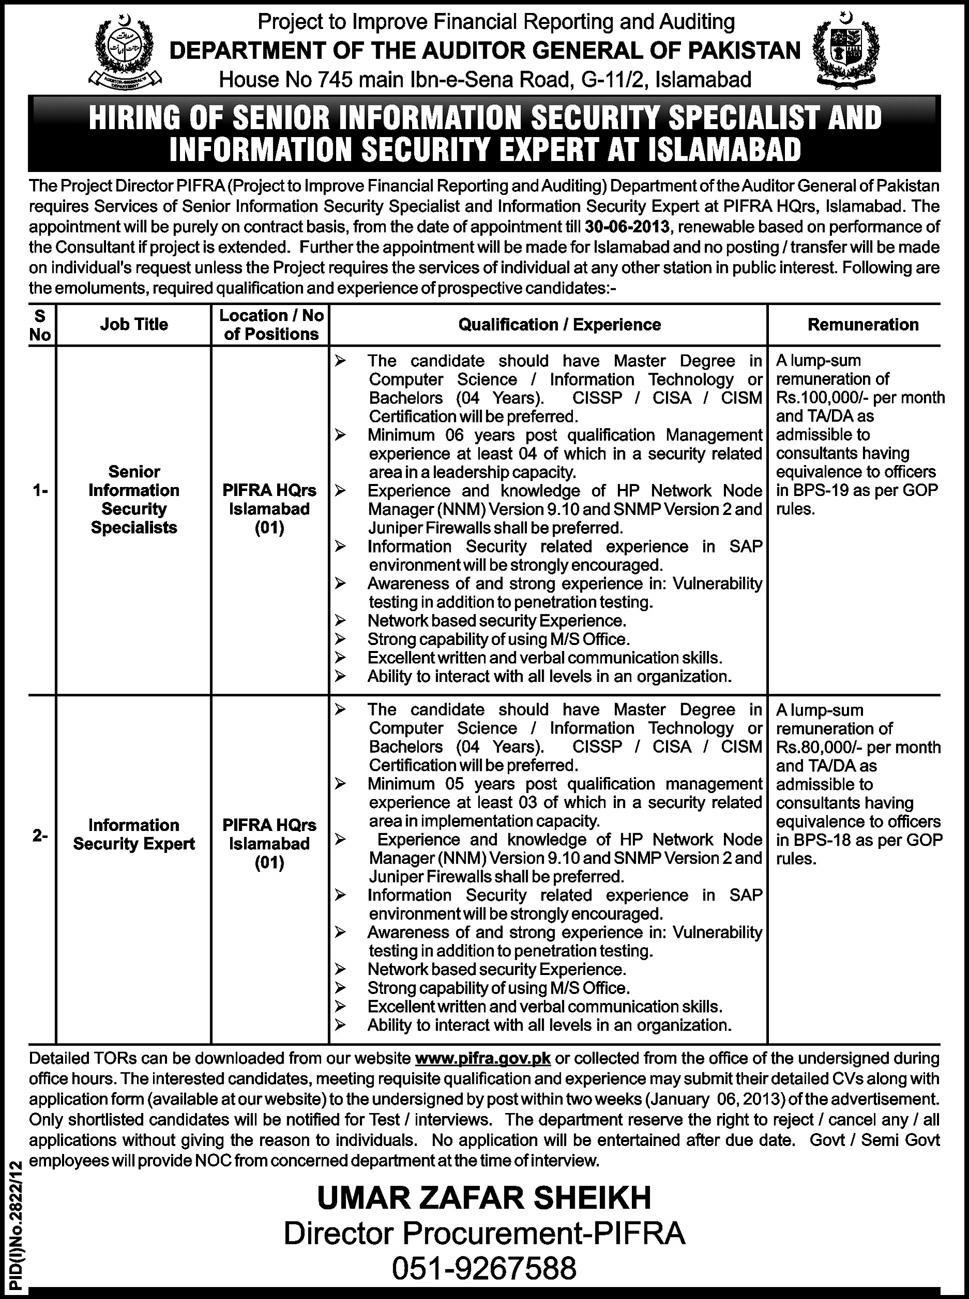 Auditor General of Pakistan Jobs for Information Security Professionals